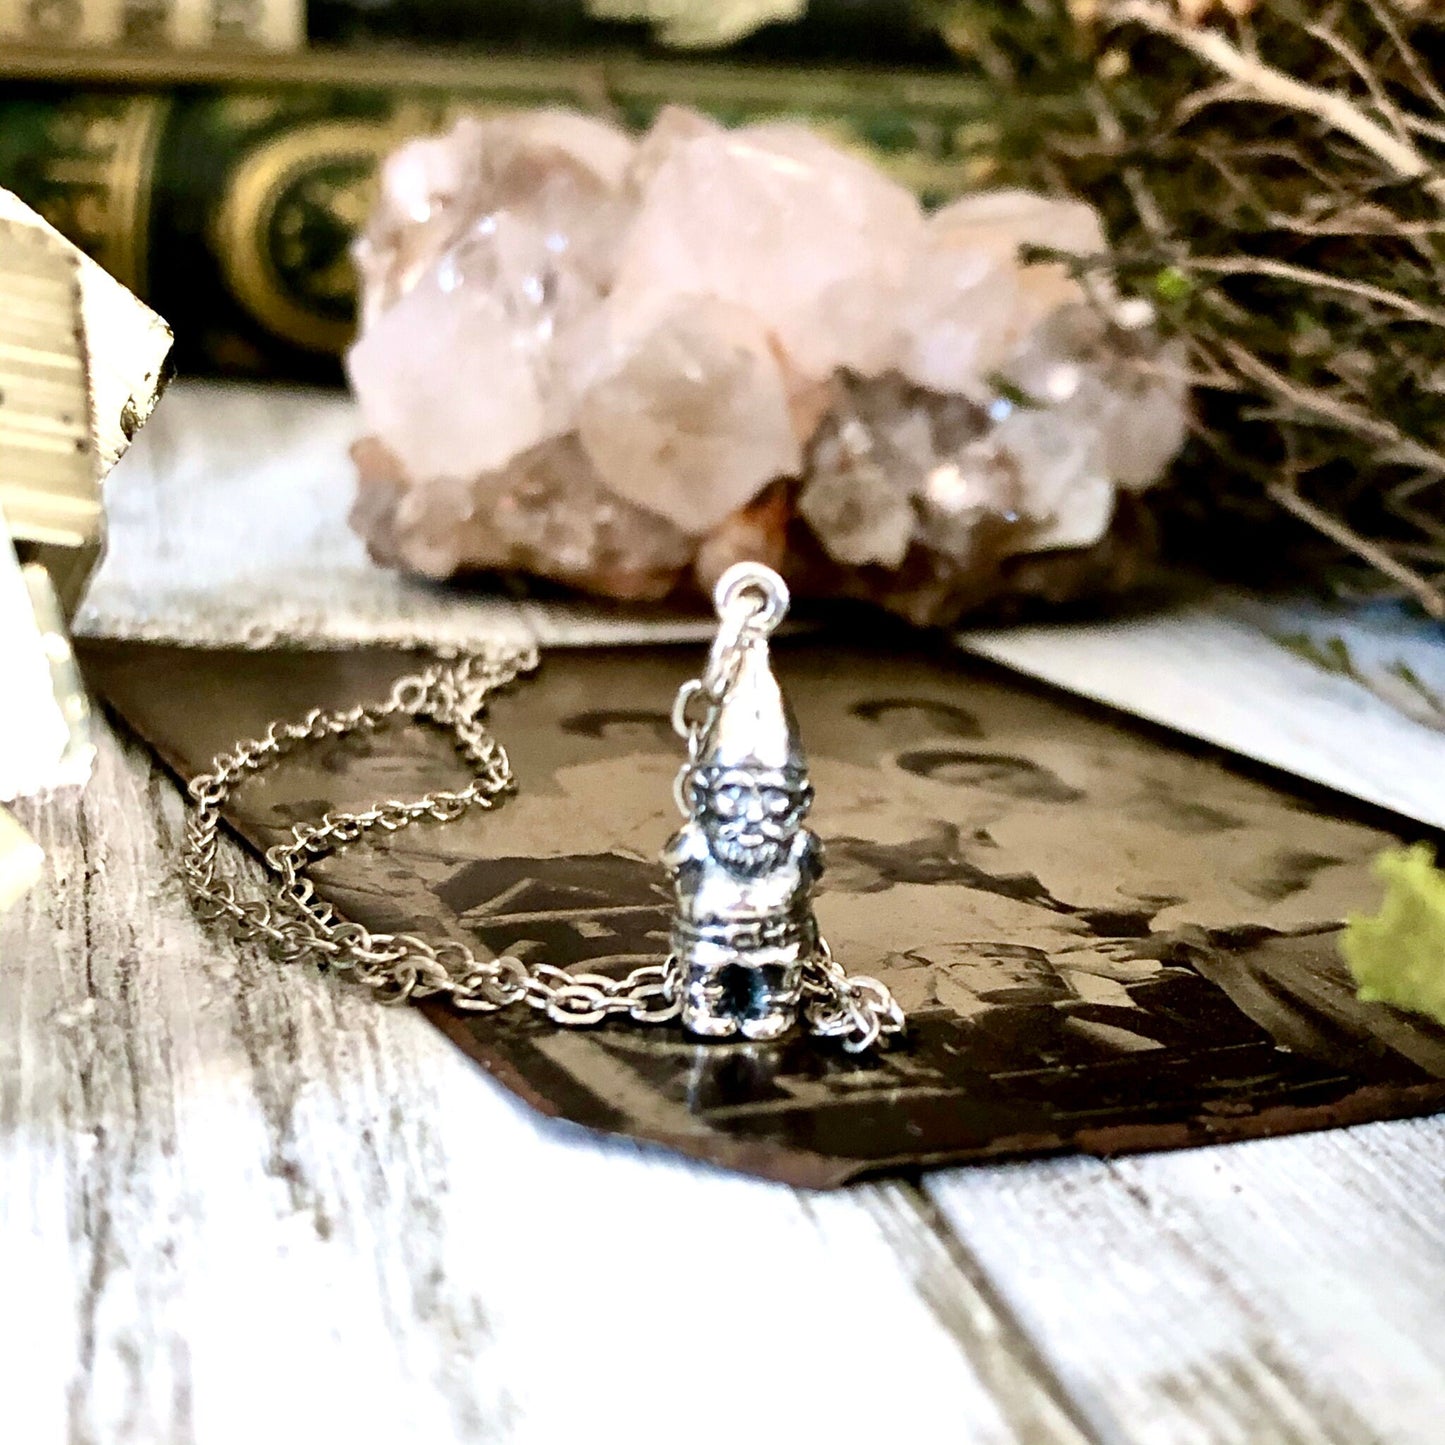 Tiny Talisman Collection - Sterling Silver Teeny Garden Gnome Necklace Pendant 19x7mm / Curated Collection - Foxlark Crystal Jewelry